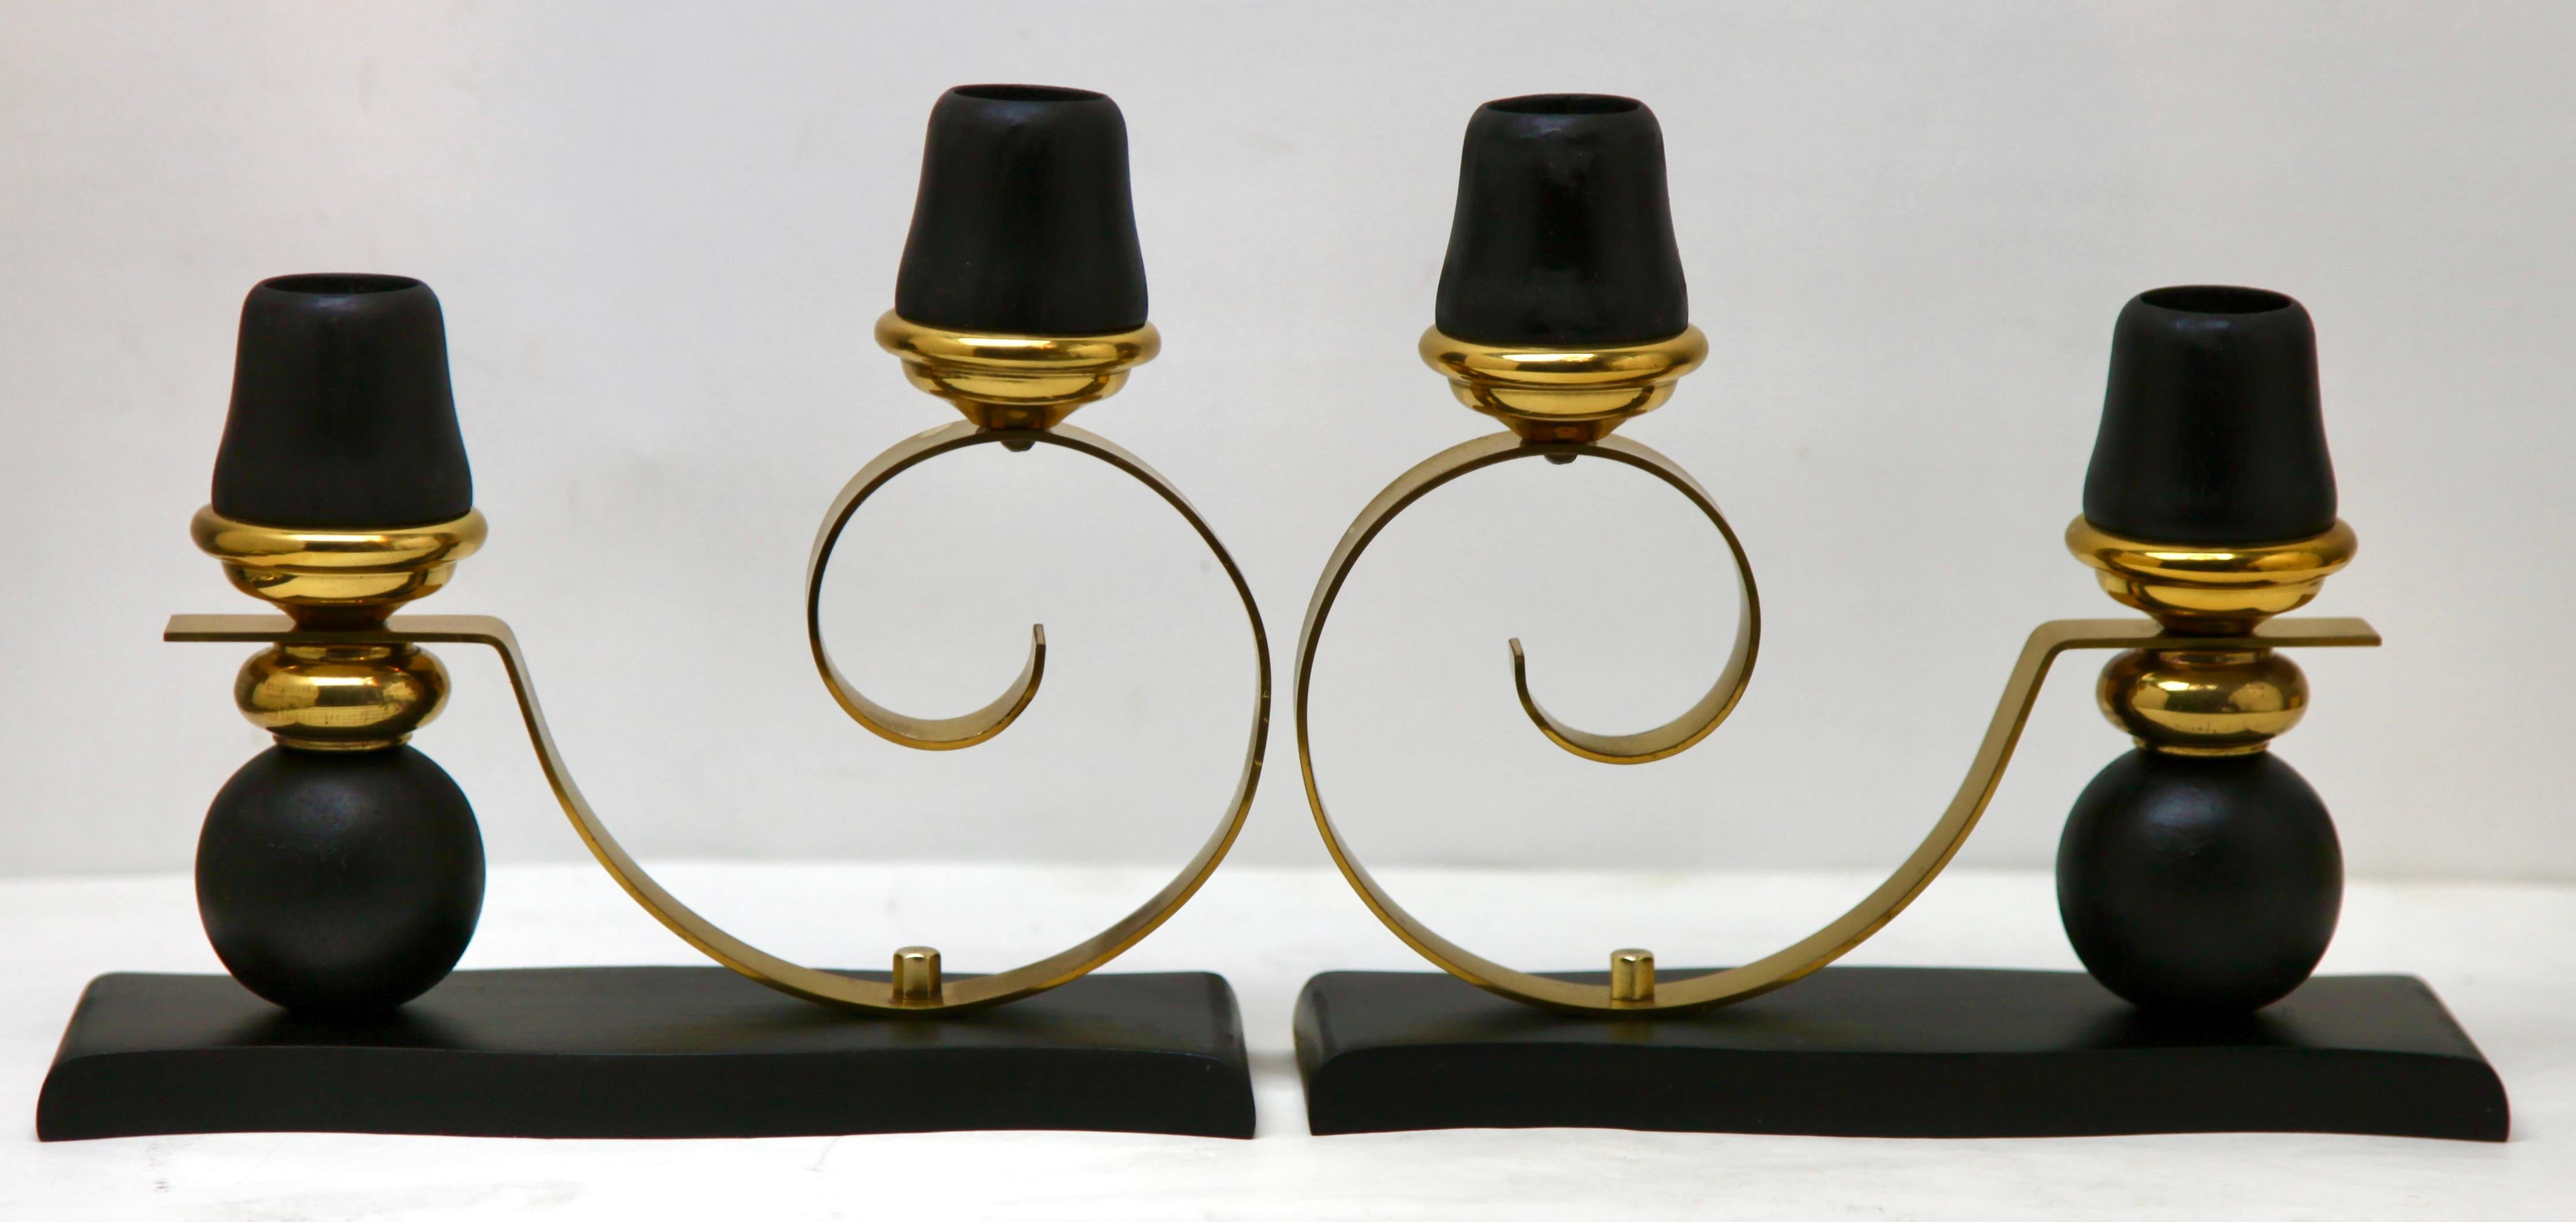 Art Deco wooden and brass pair of candlesticks 1930s
Completely cleaned and Polished the Wood has also been Waxed.
Excellent condition.
Whit original Patina.

Looks simply stunning.

  

